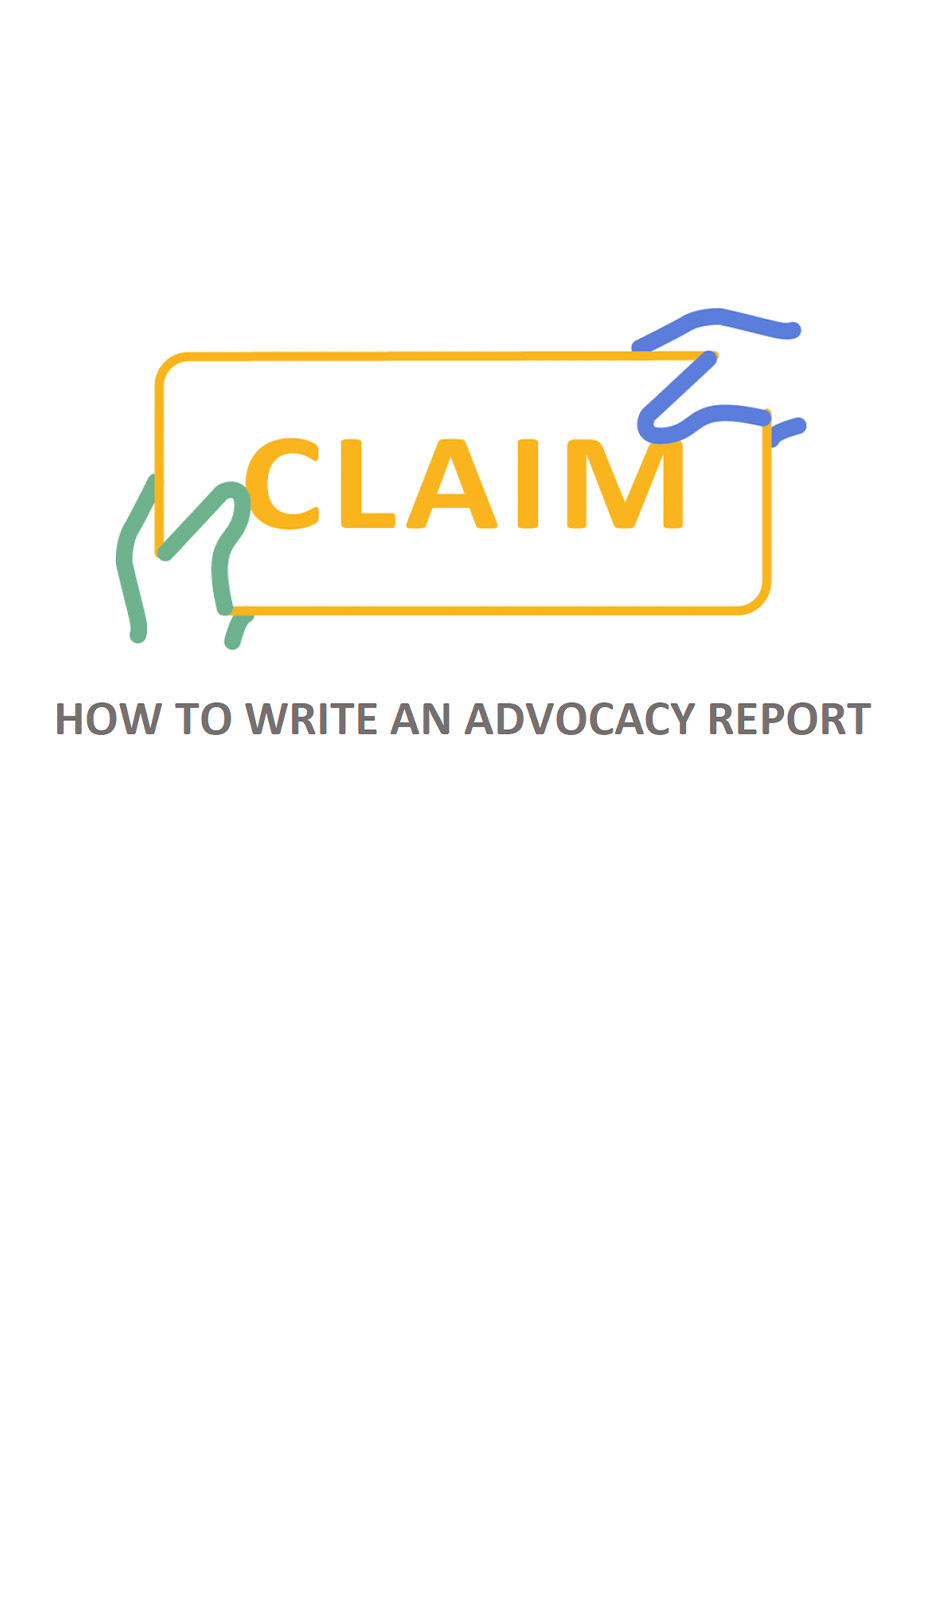 How to write an advocacy report